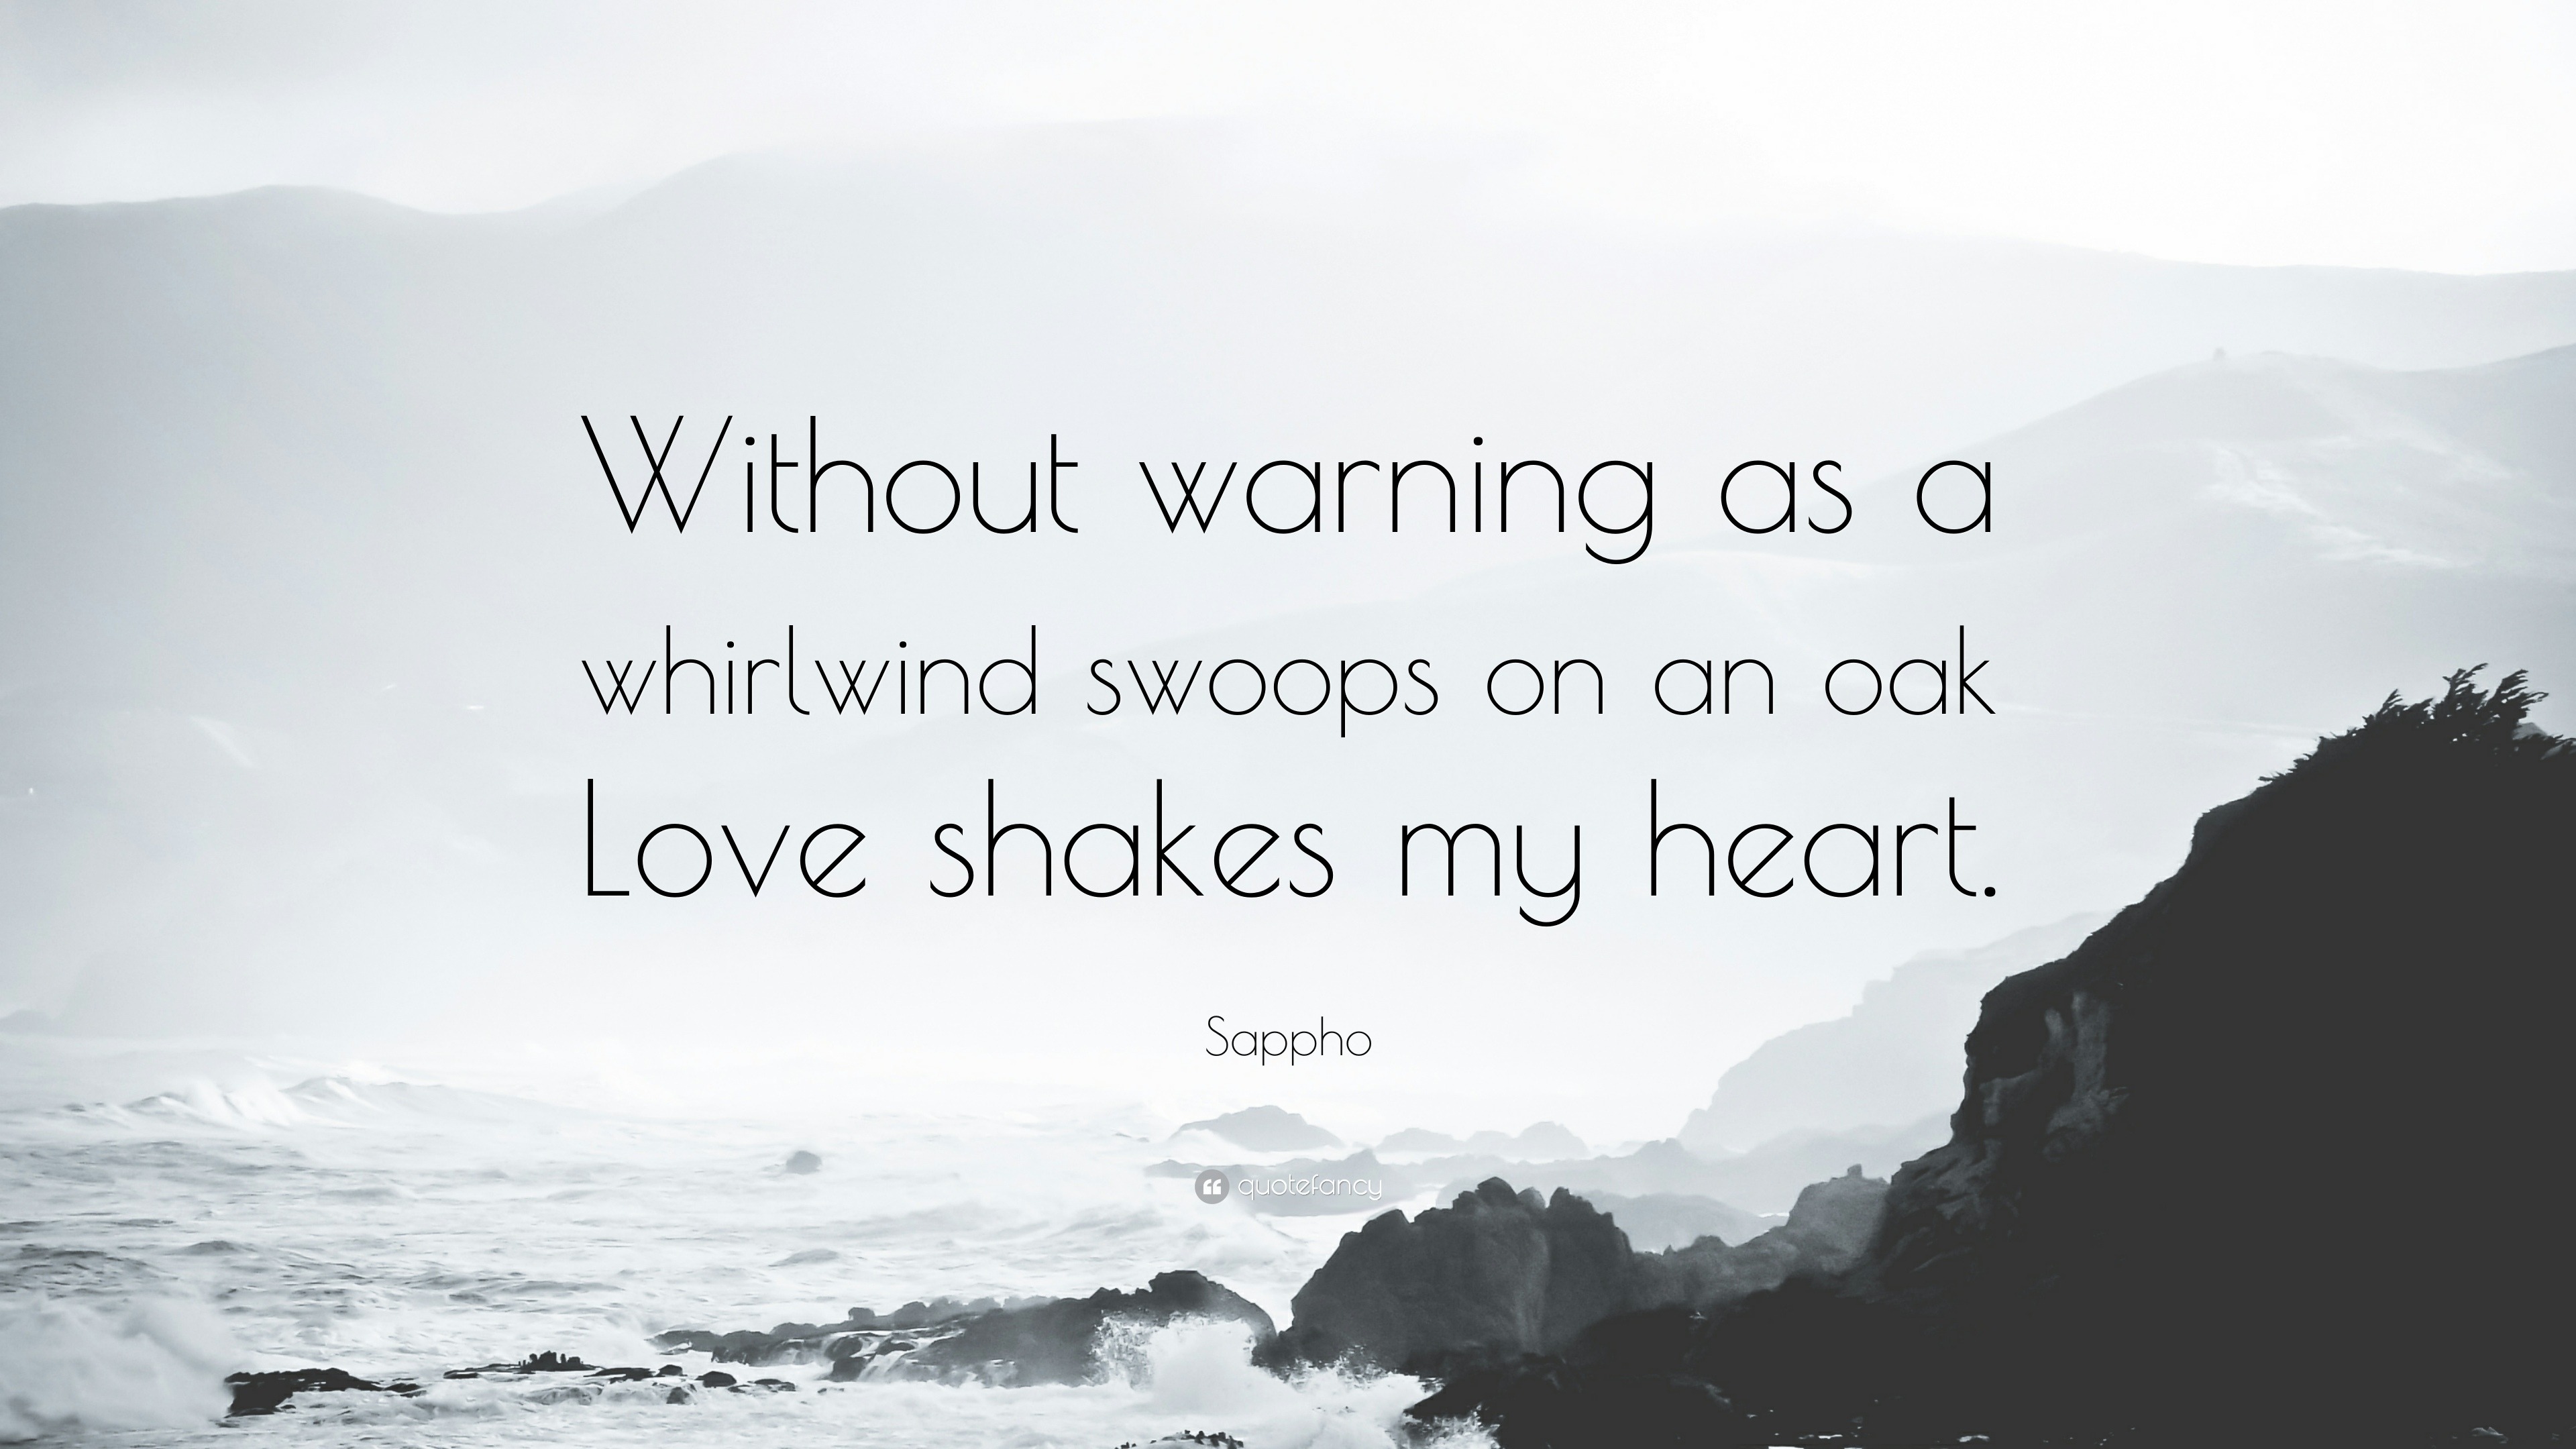 Sappho Quote Without Warning As A Whirlwind Swoops On An Oak Love Shakes My Heart